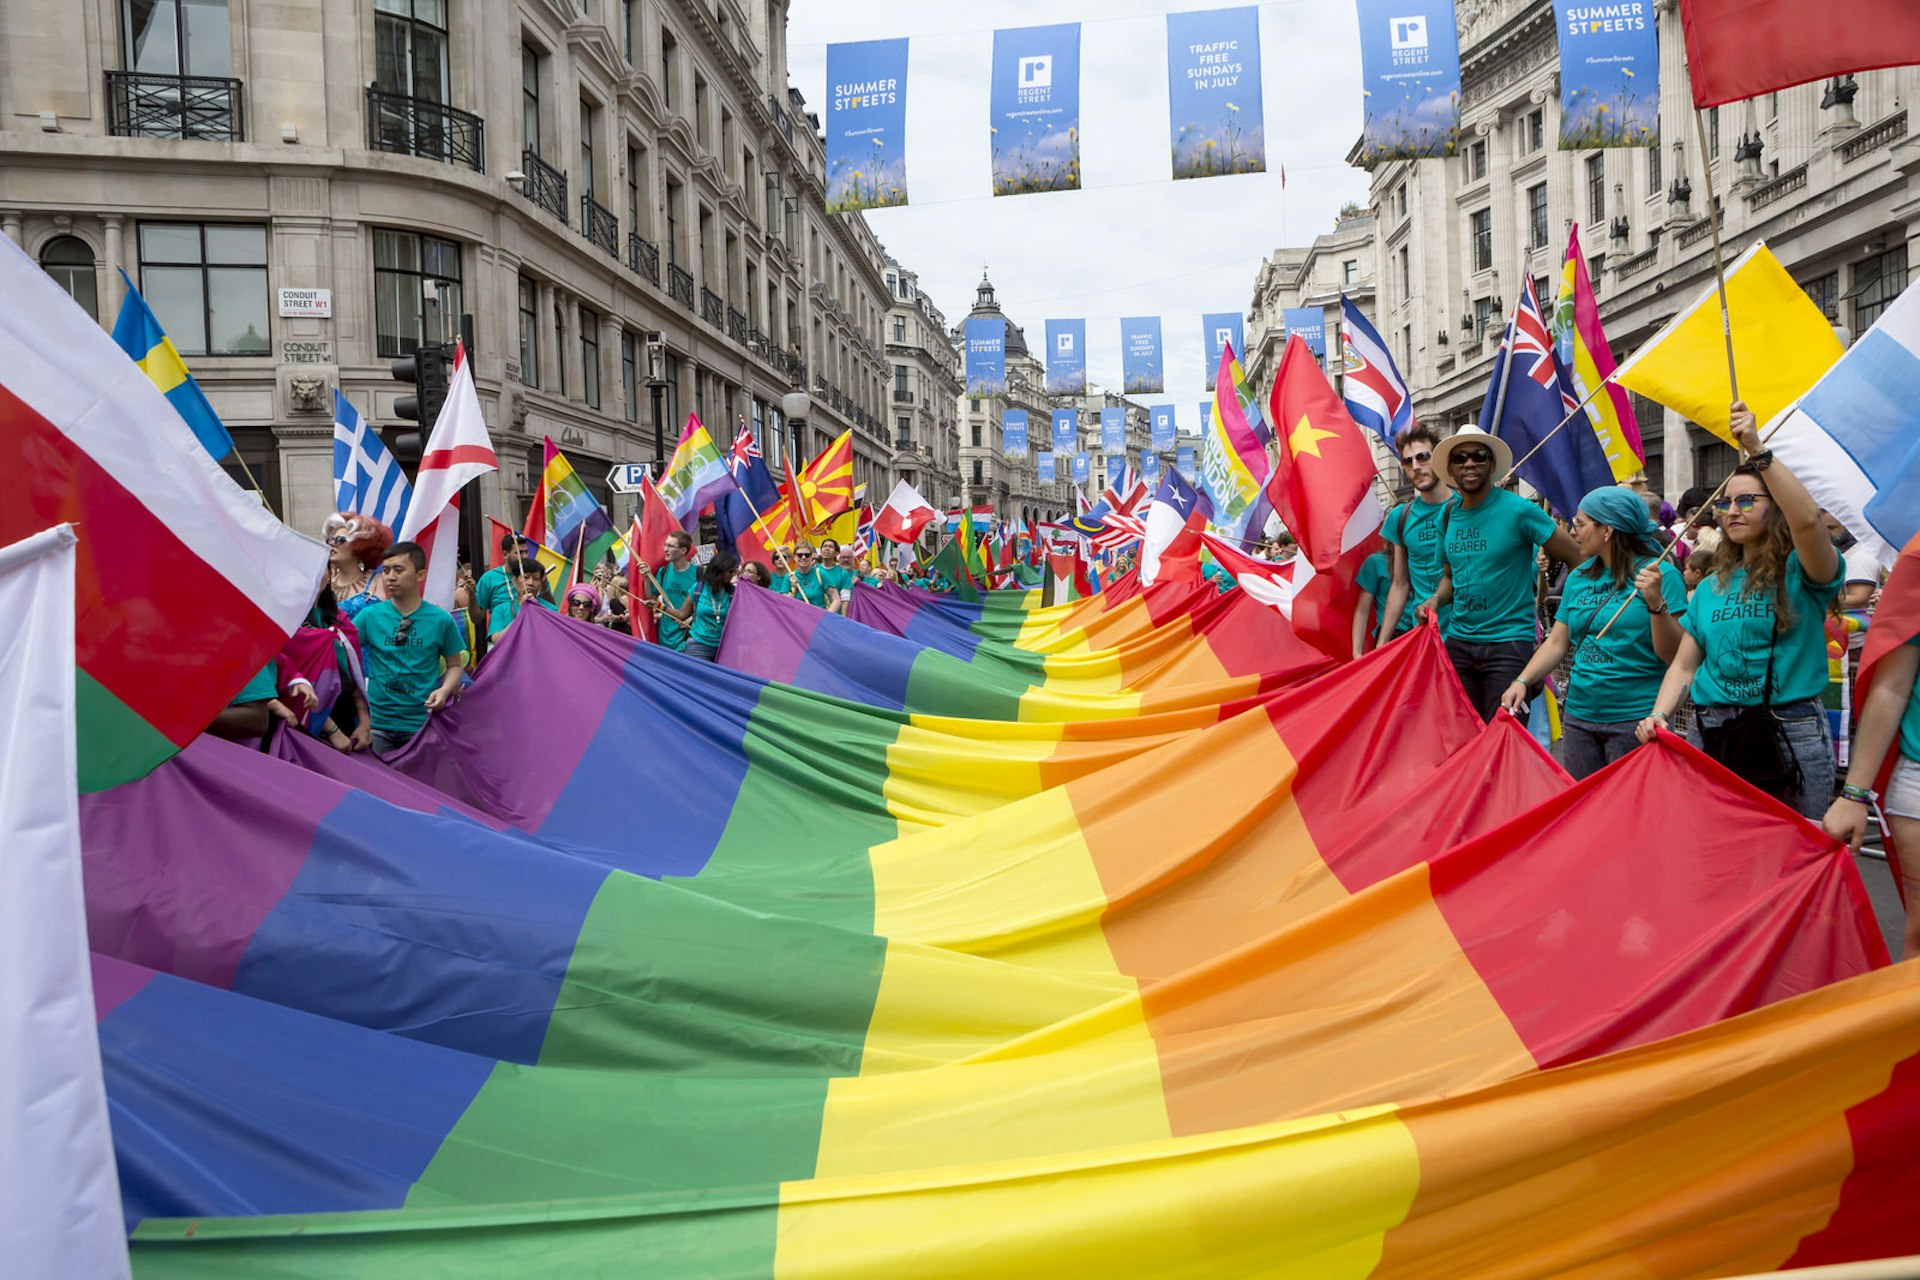 Pride in London parade participants carrying a huge rainbow flag along Regent Street; everyone is wearing matching green shirts that say 'flag bearer' on them, and unsurprisingly, they each have one hand on the rainbow flag and the other on their nation's flag (those of Sweden, Greece, China, New Zealand, Belarus are visible) 